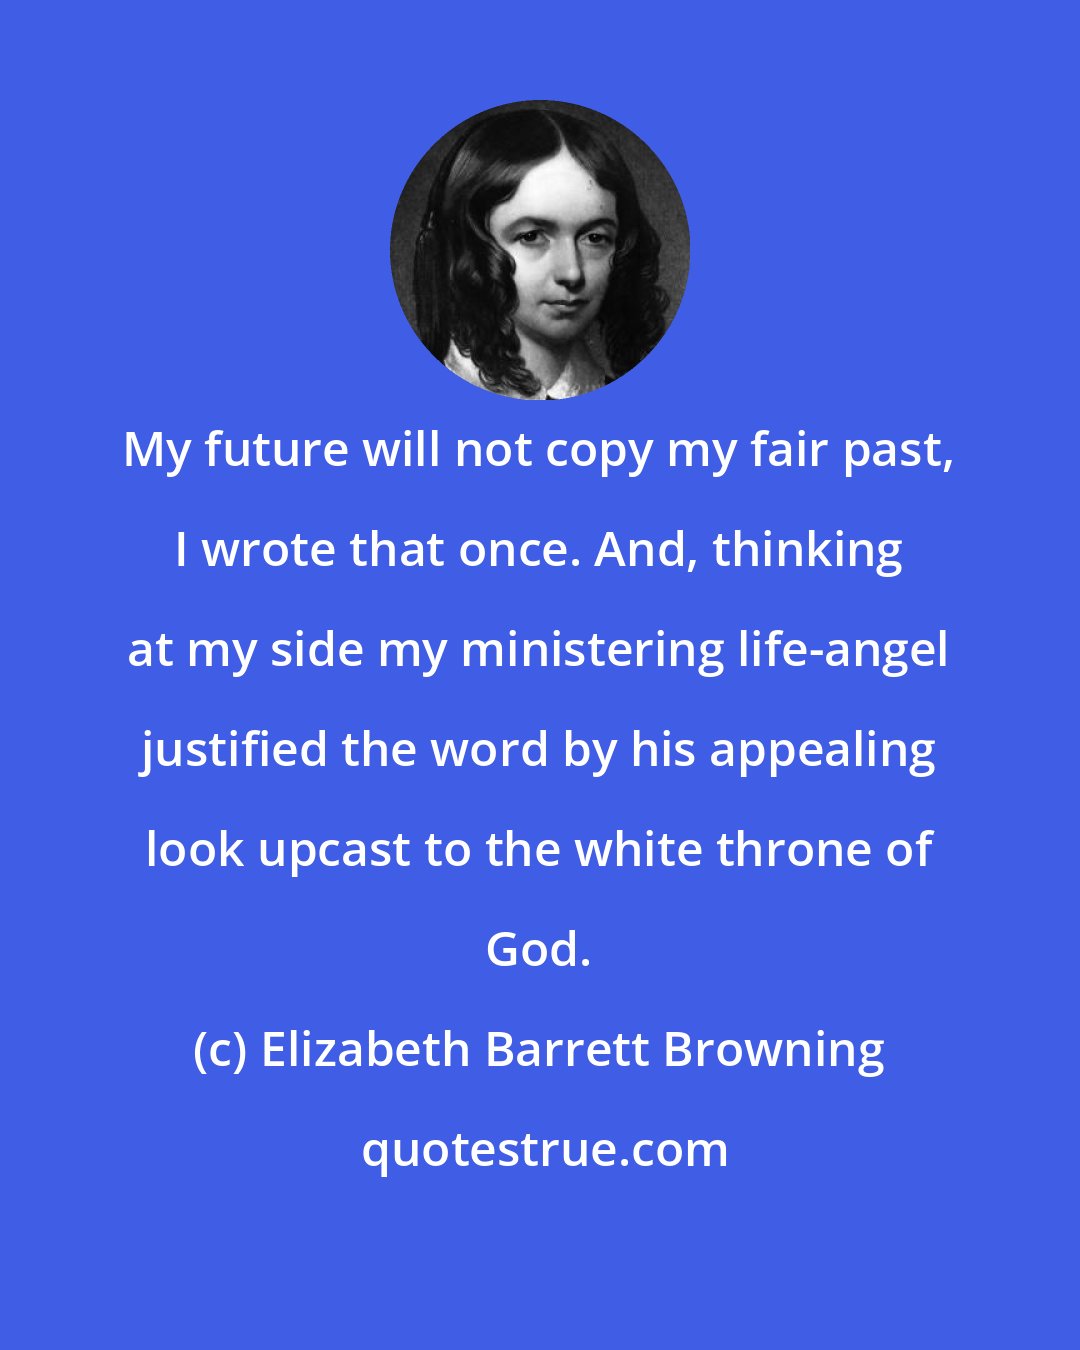 Elizabeth Barrett Browning: My future will not copy my fair past, I wrote that once. And, thinking at my side my ministering life-angel justified the word by his appealing look upcast to the white throne of God.